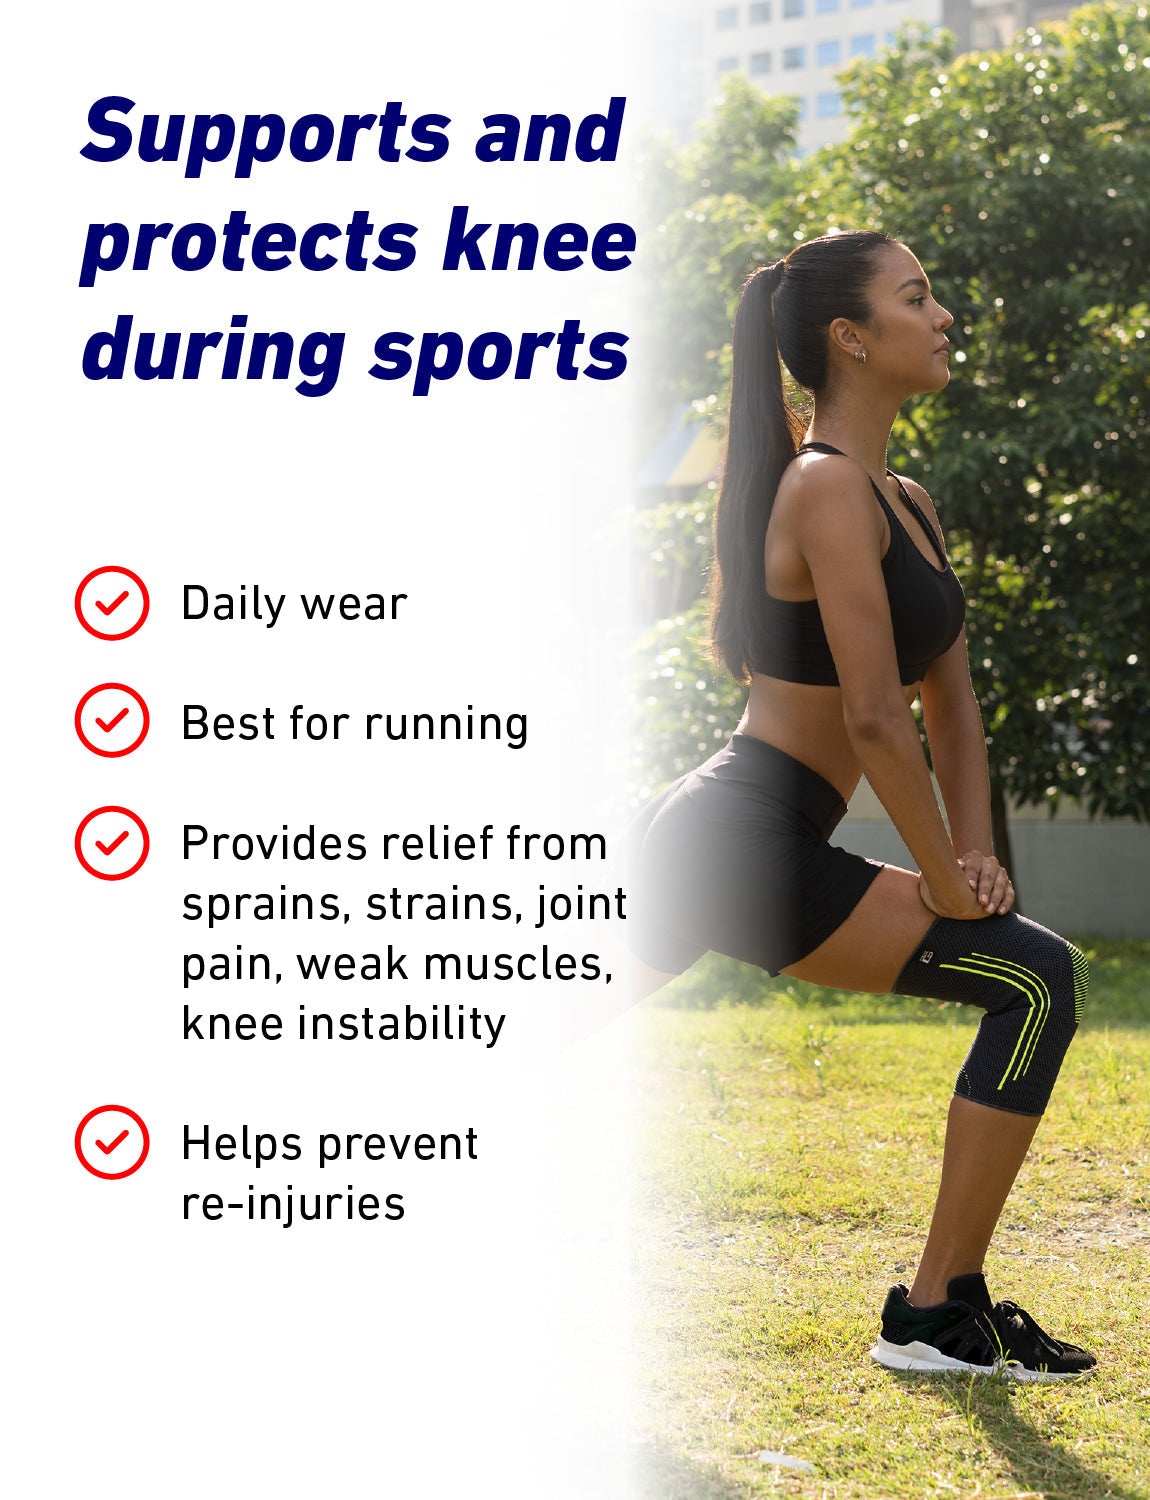 Active Knee Support - Fits Left or Right Knee